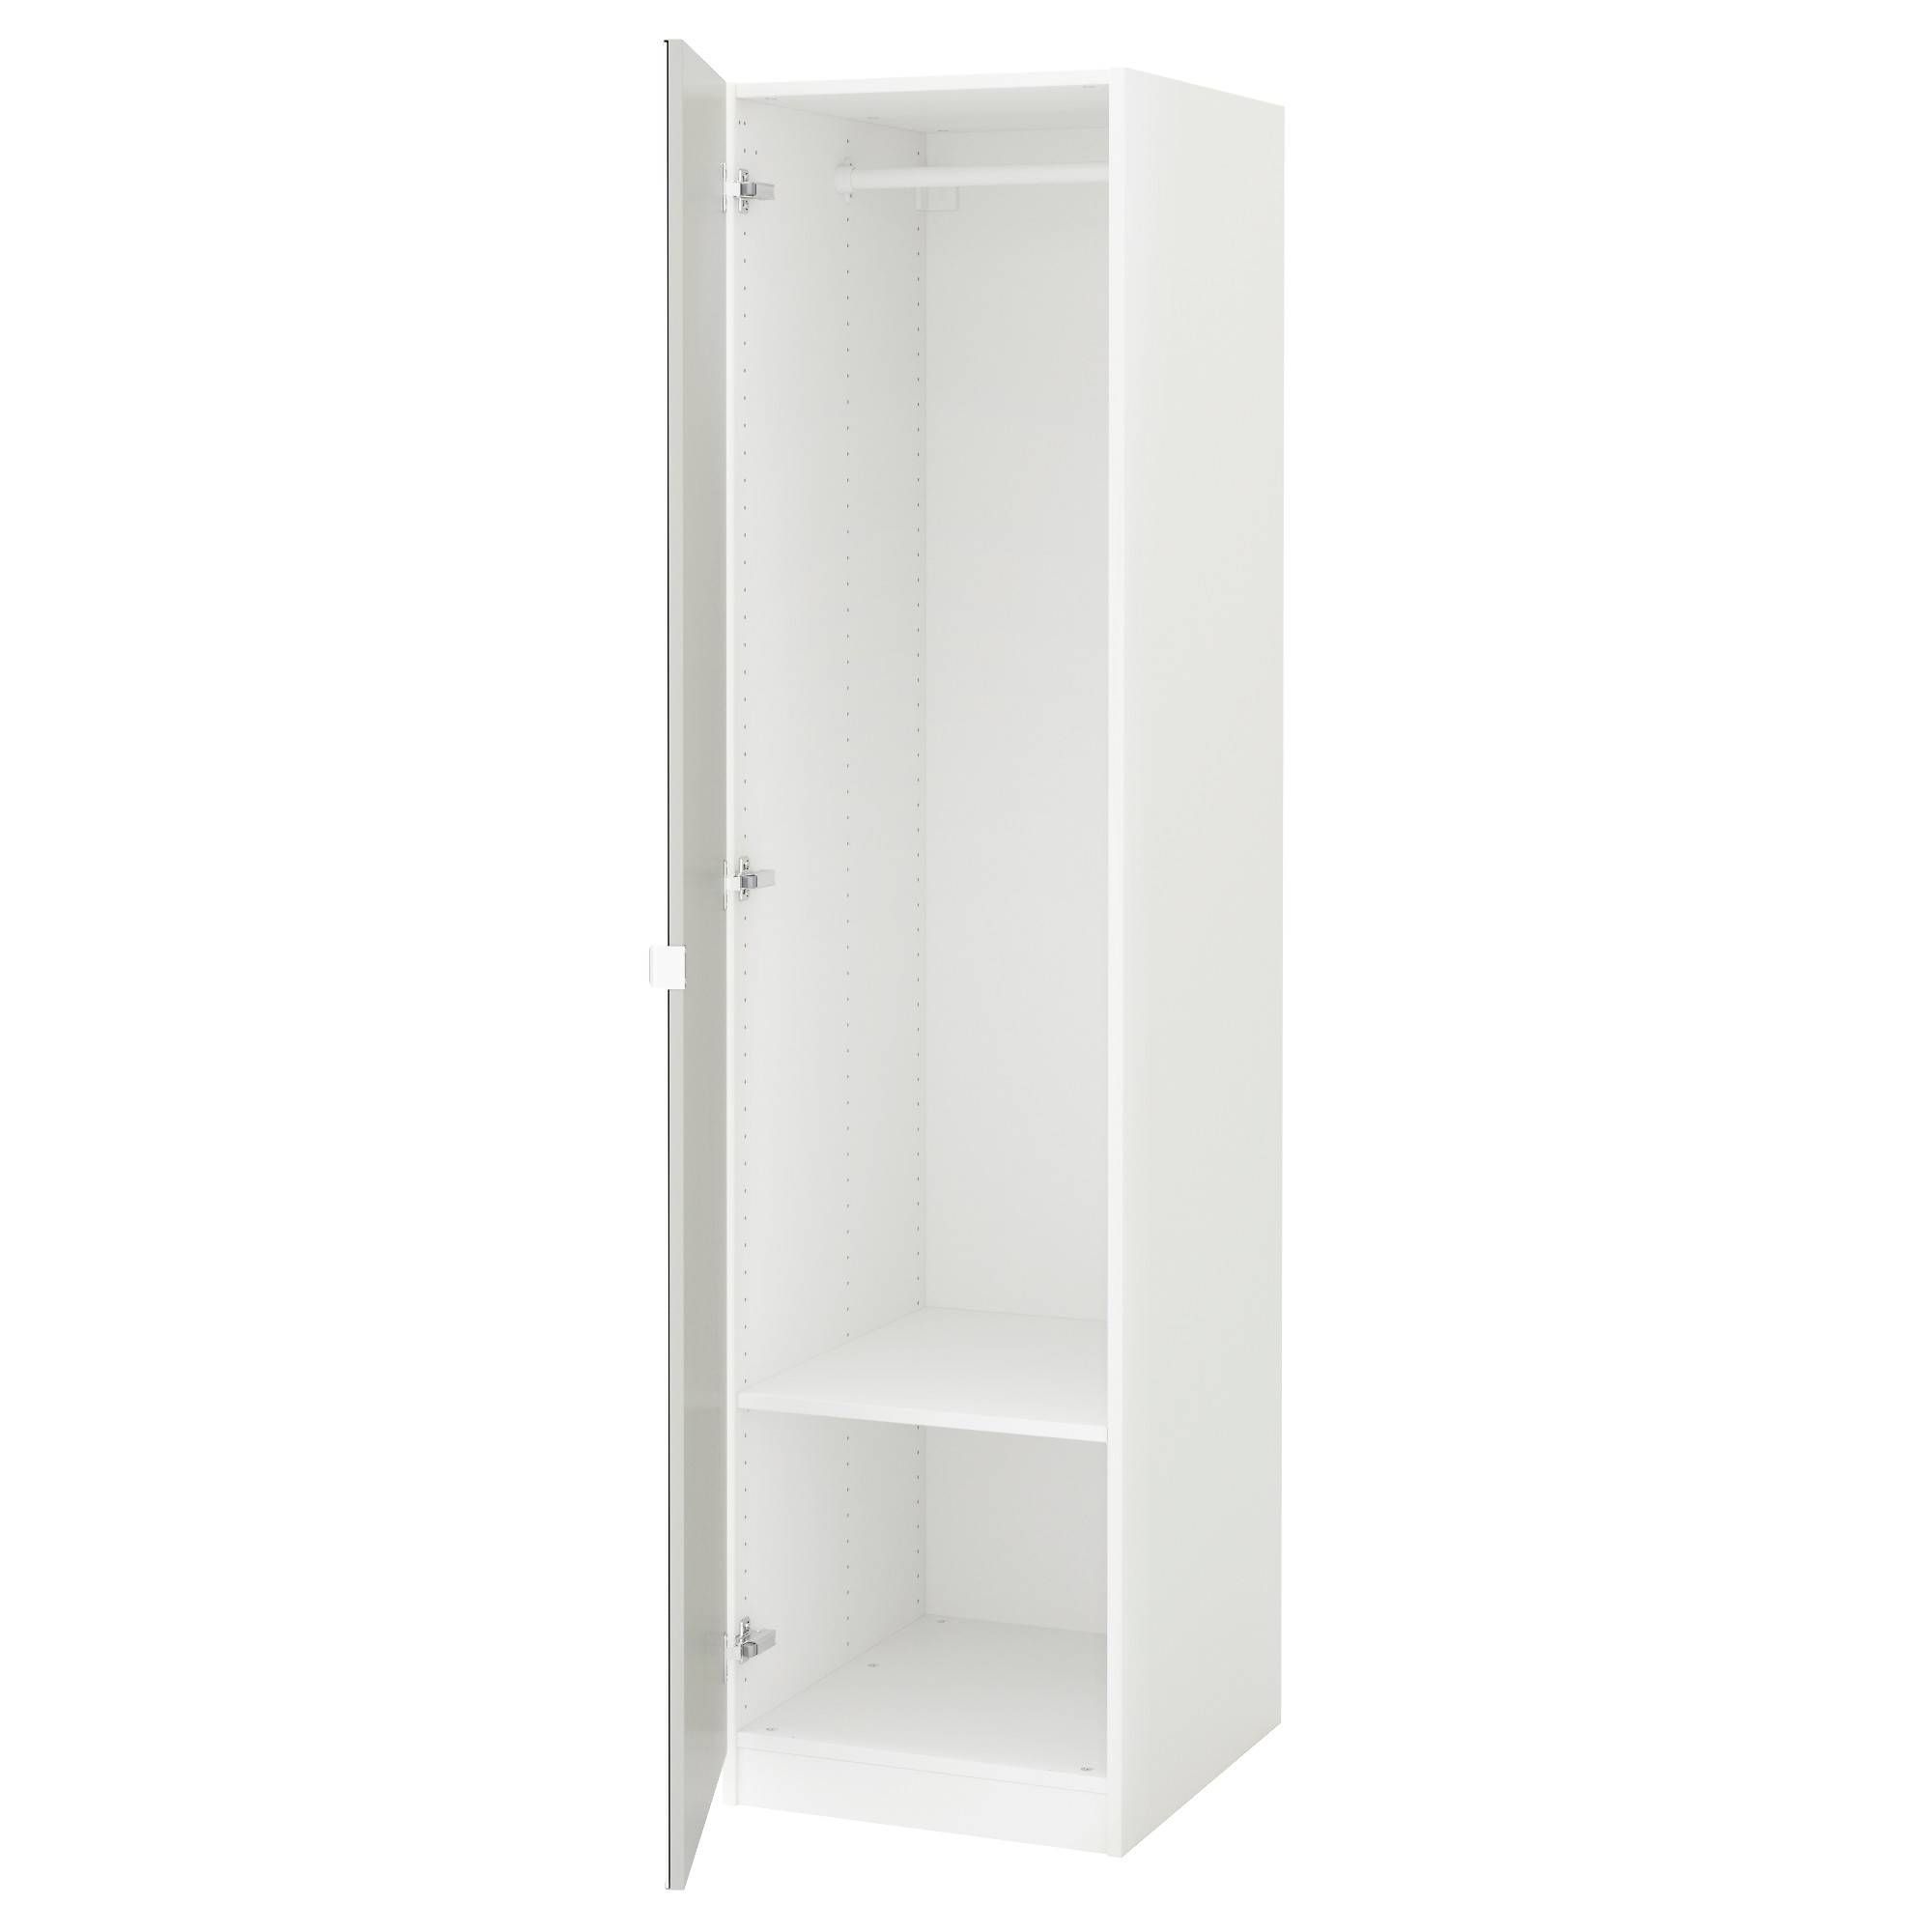 Pax Wardrobe White/vikedal Mirror Glass 50x60x201 Cm – Ikea Intended For Single Wardrobes (View 6 of 15)